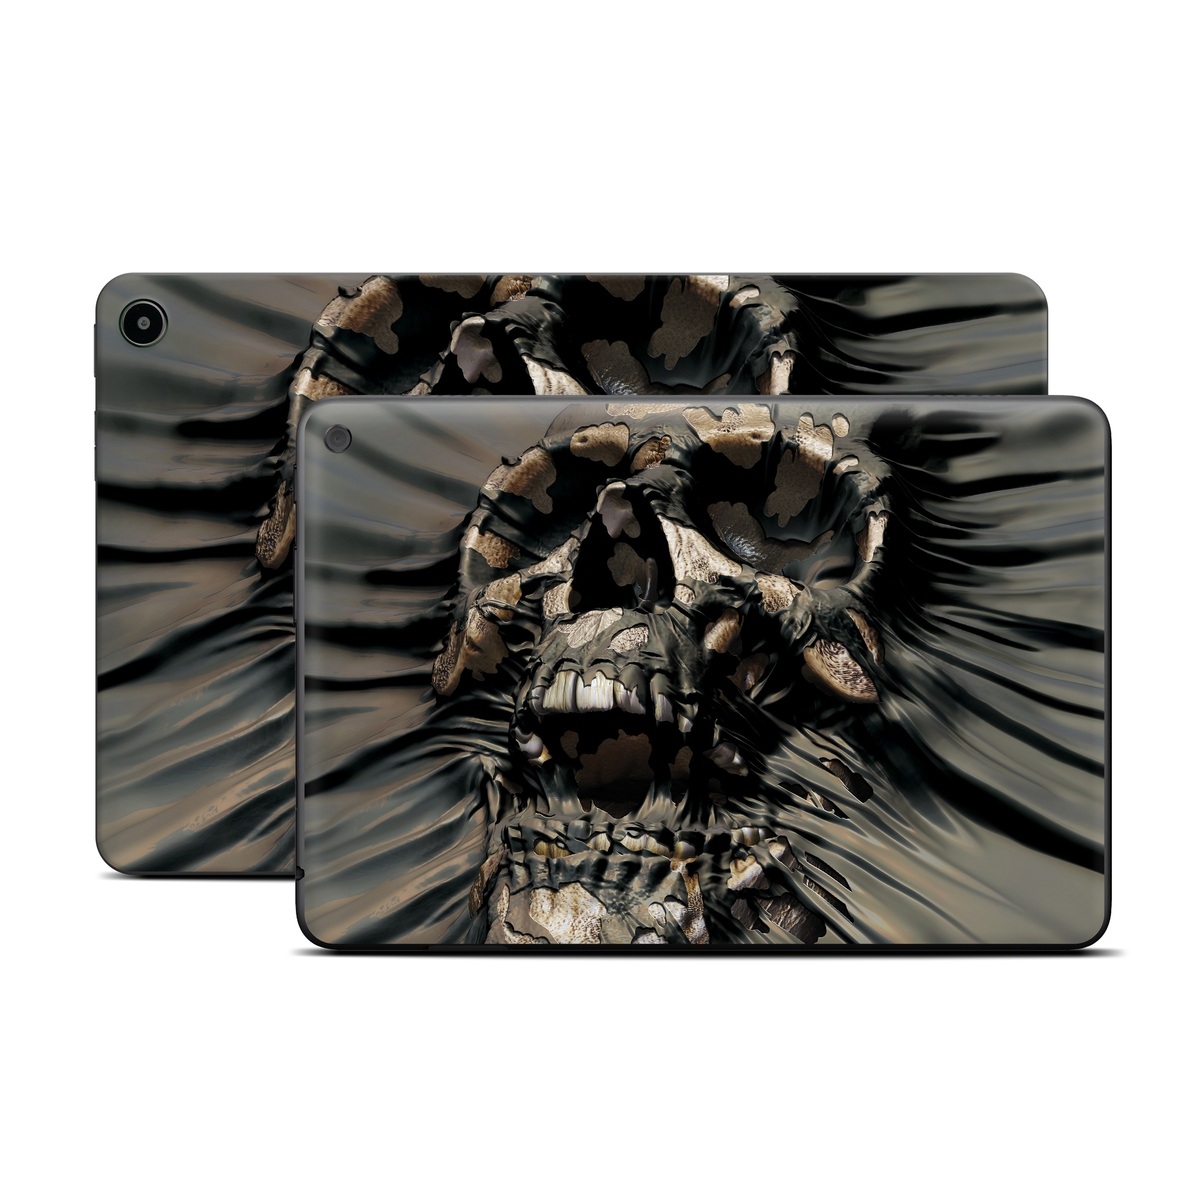 Amazon Fire Tablet Series Skin Skin design of Cg artwork, Fictional character, Illustration, Demon, Fiction, Supervillain, Mythology, Art, with black, green, gray, red colors